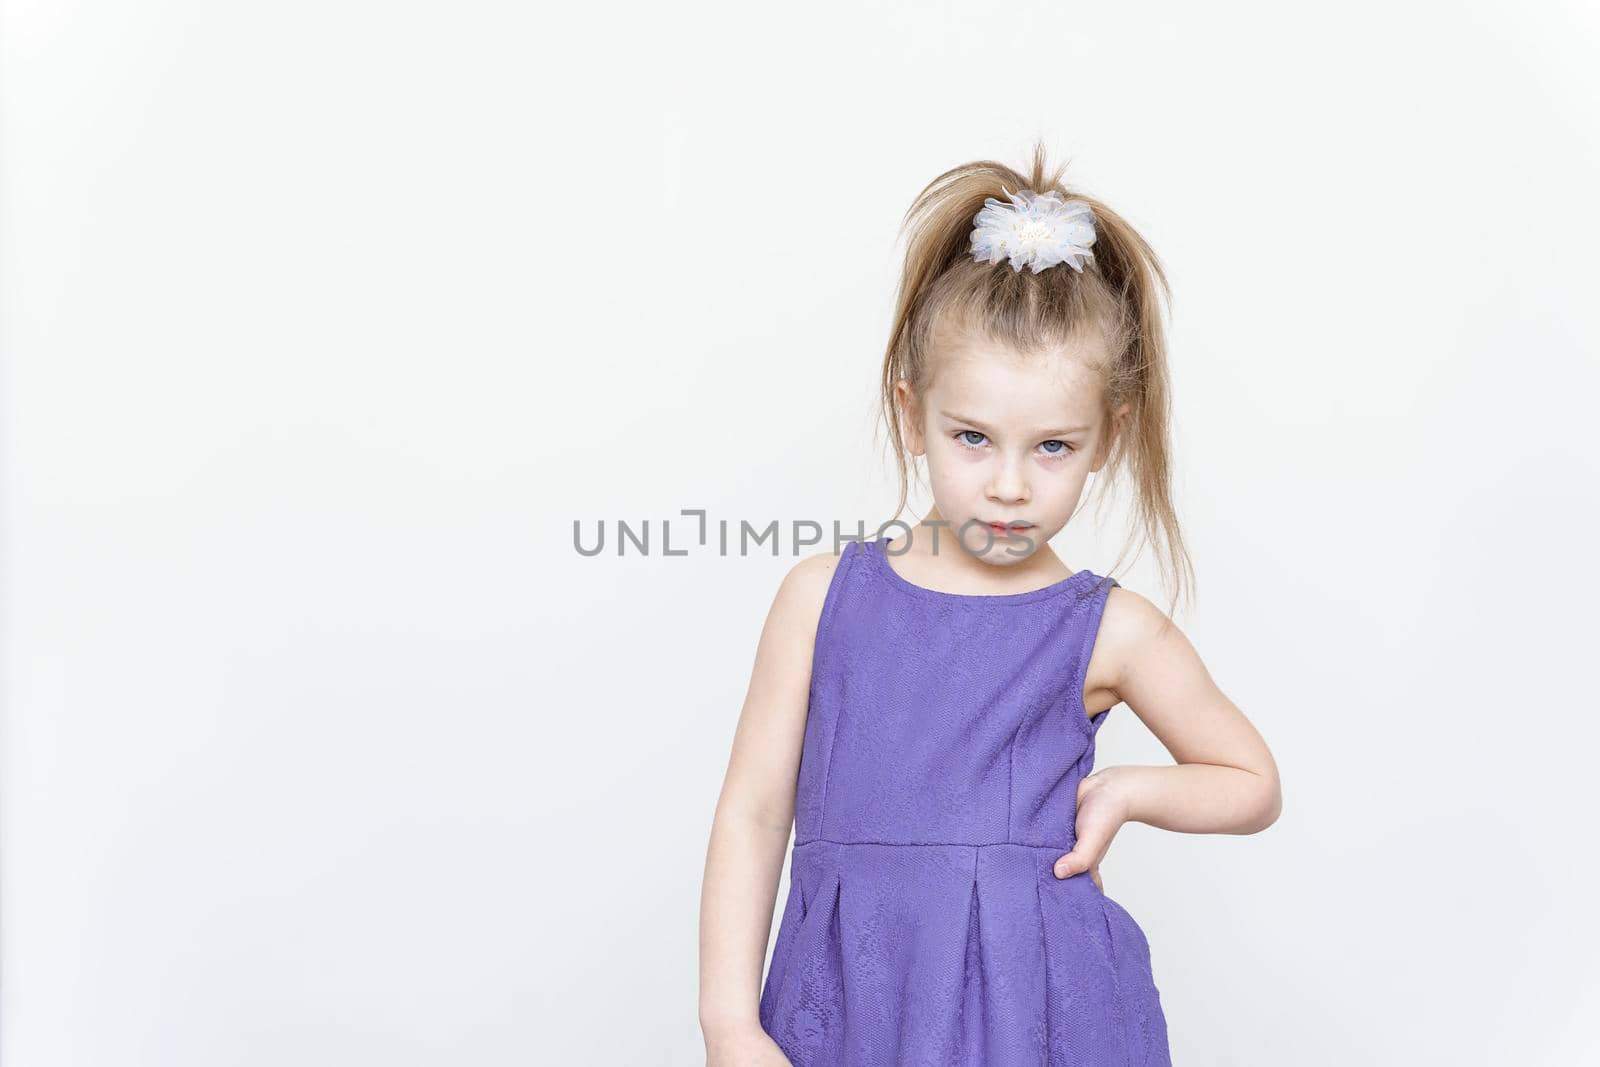 portrait of a cute 5 year old girl on a light background.